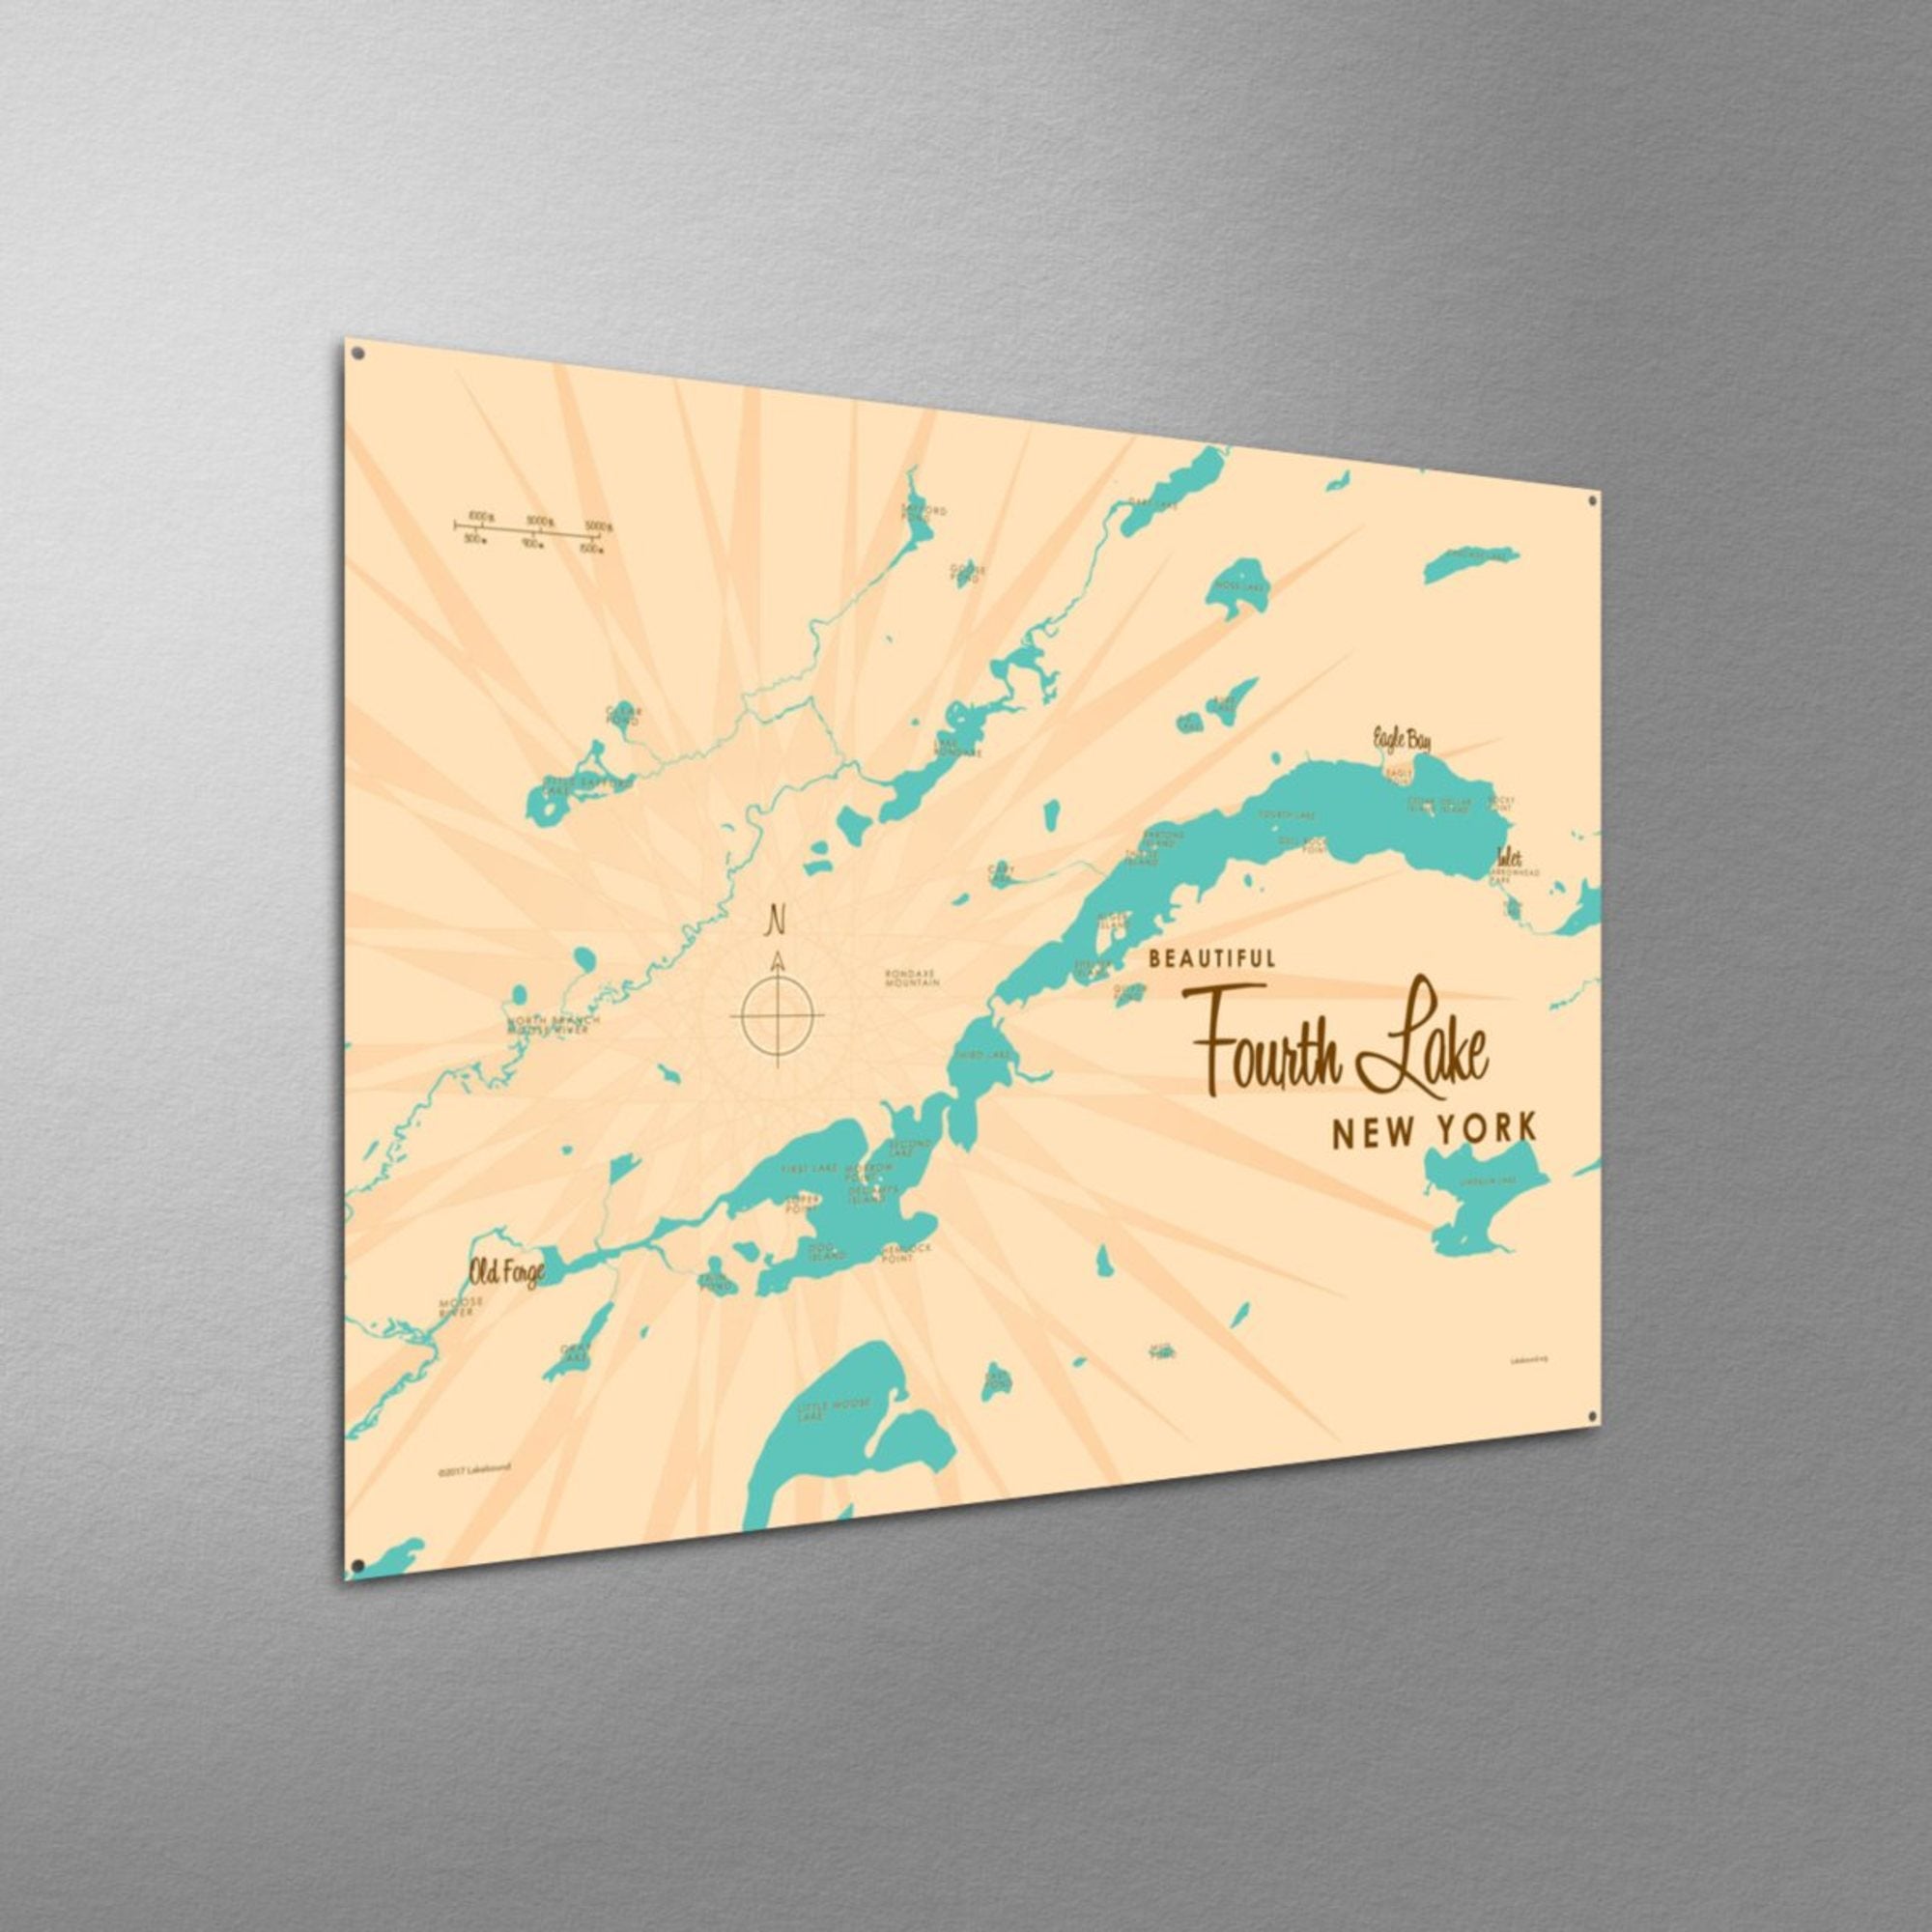 Fourth Lake New York (Herkimer County), Metal Sign Map Art